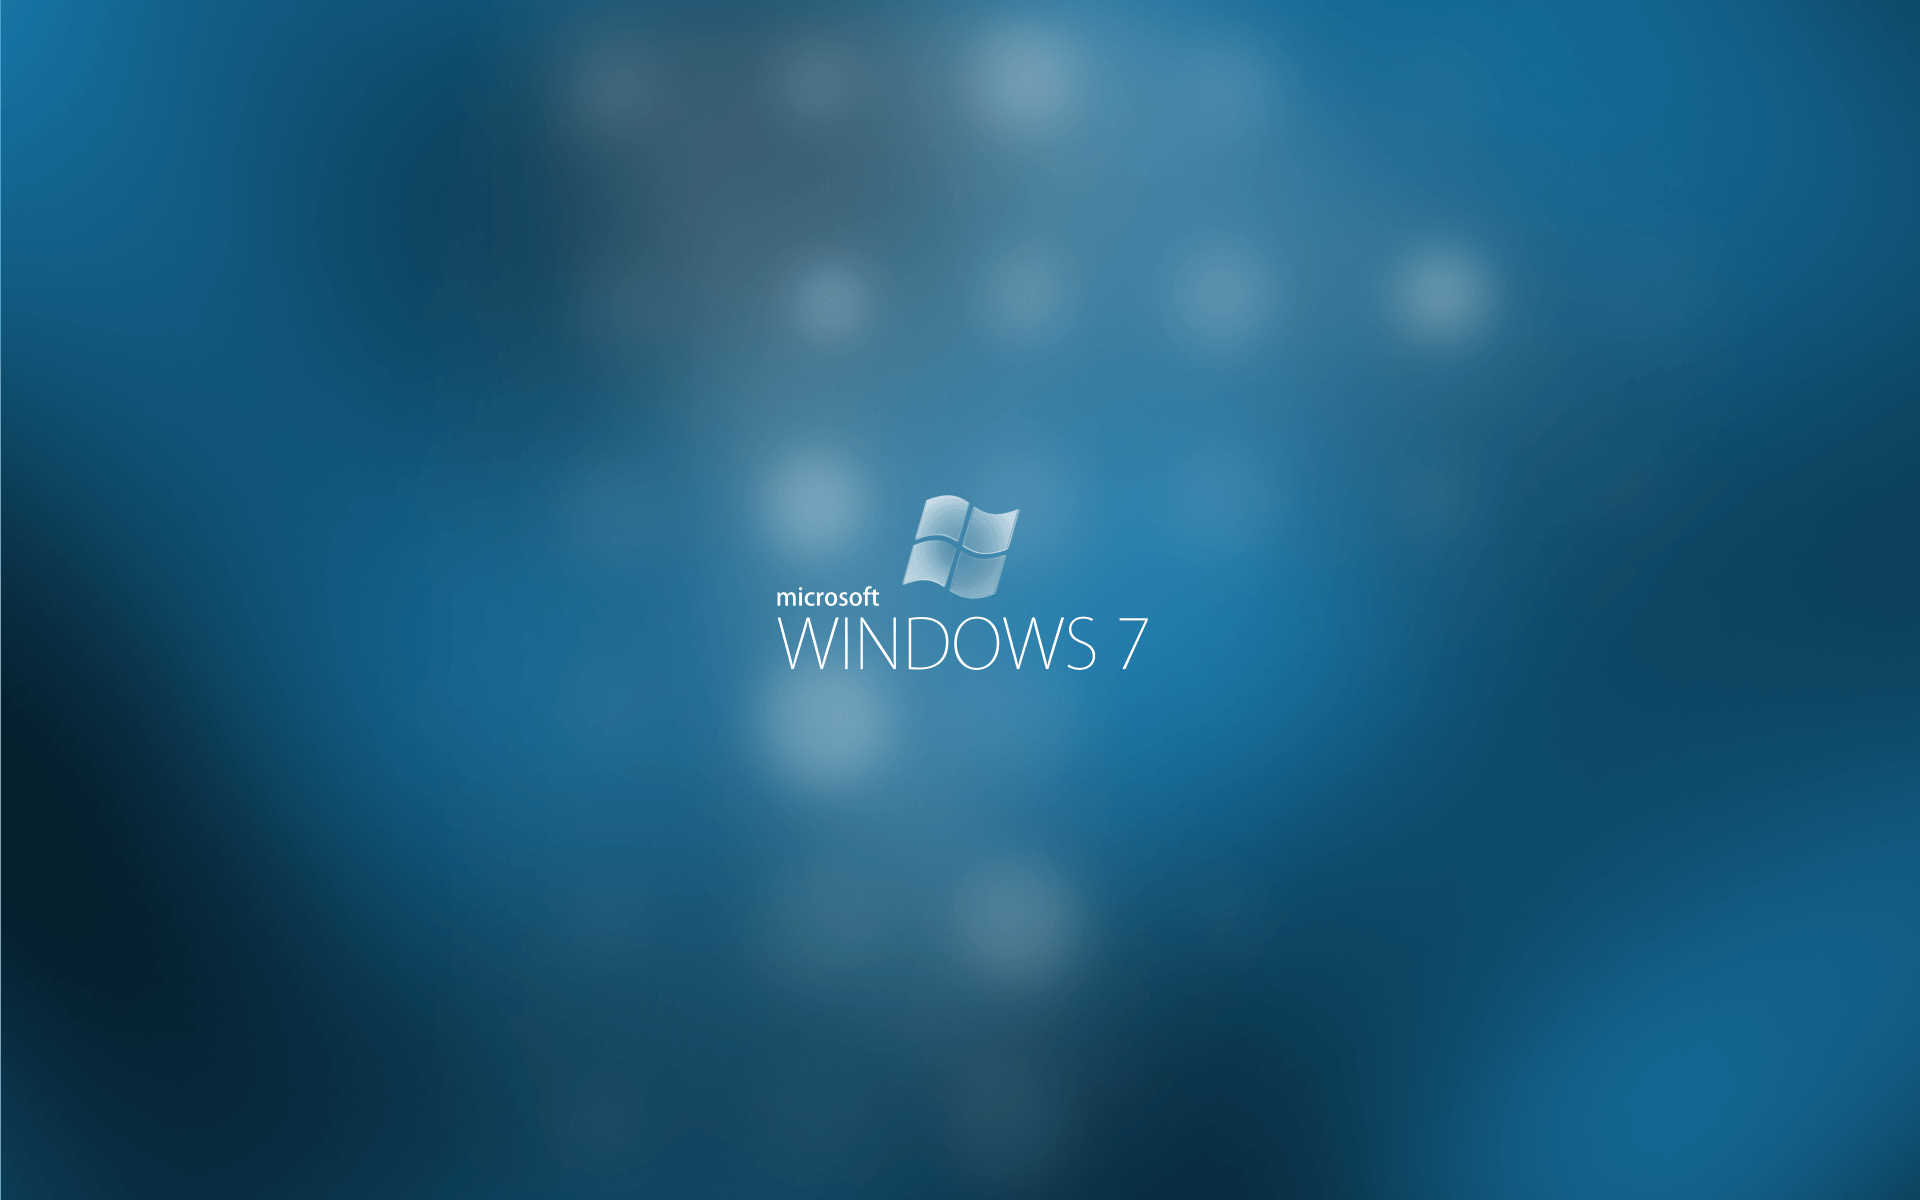 Windows 7 « Awesome Wallpaper